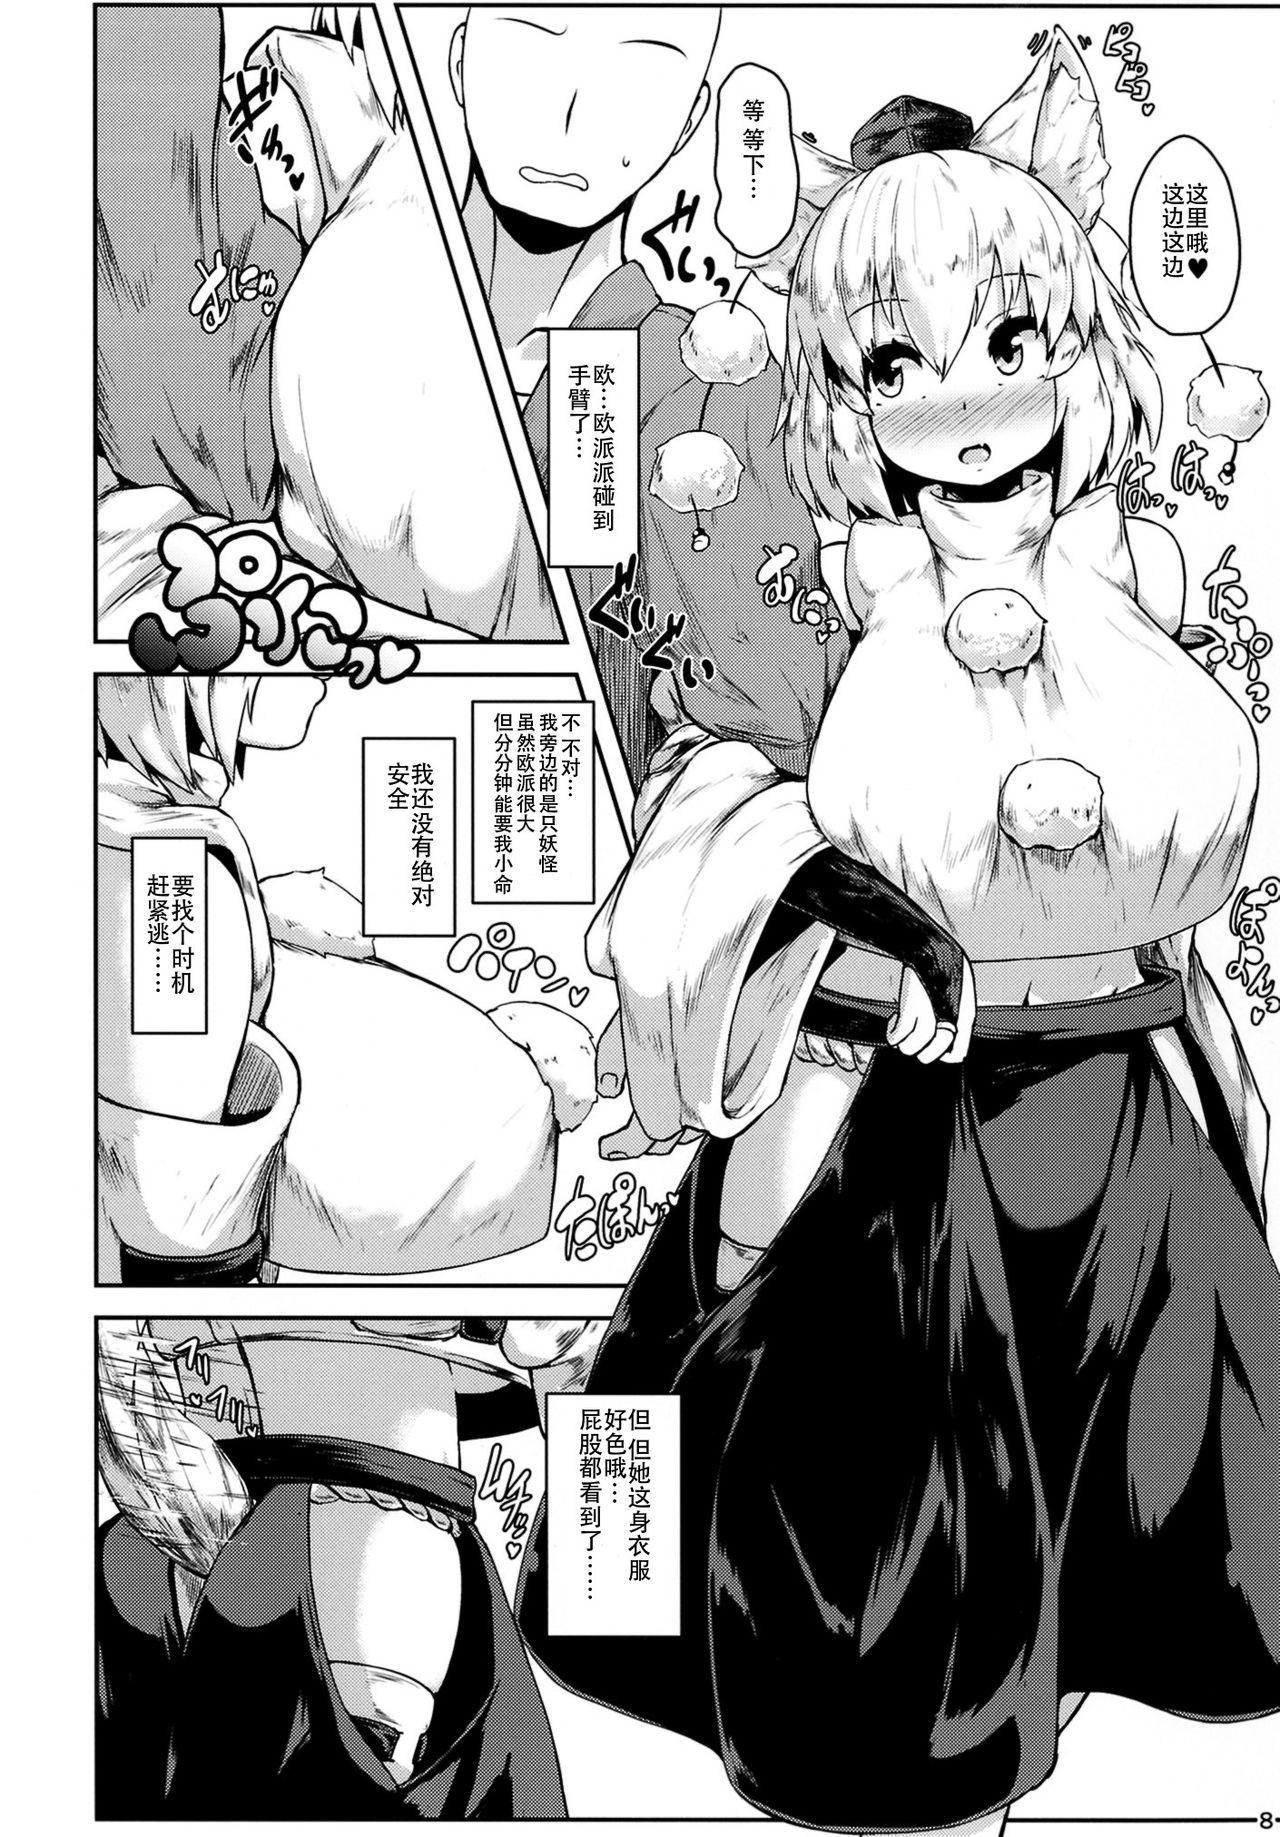 Nasty Porn Oppai Momiji - Touhou project Hot Blow Jobs - Page 8